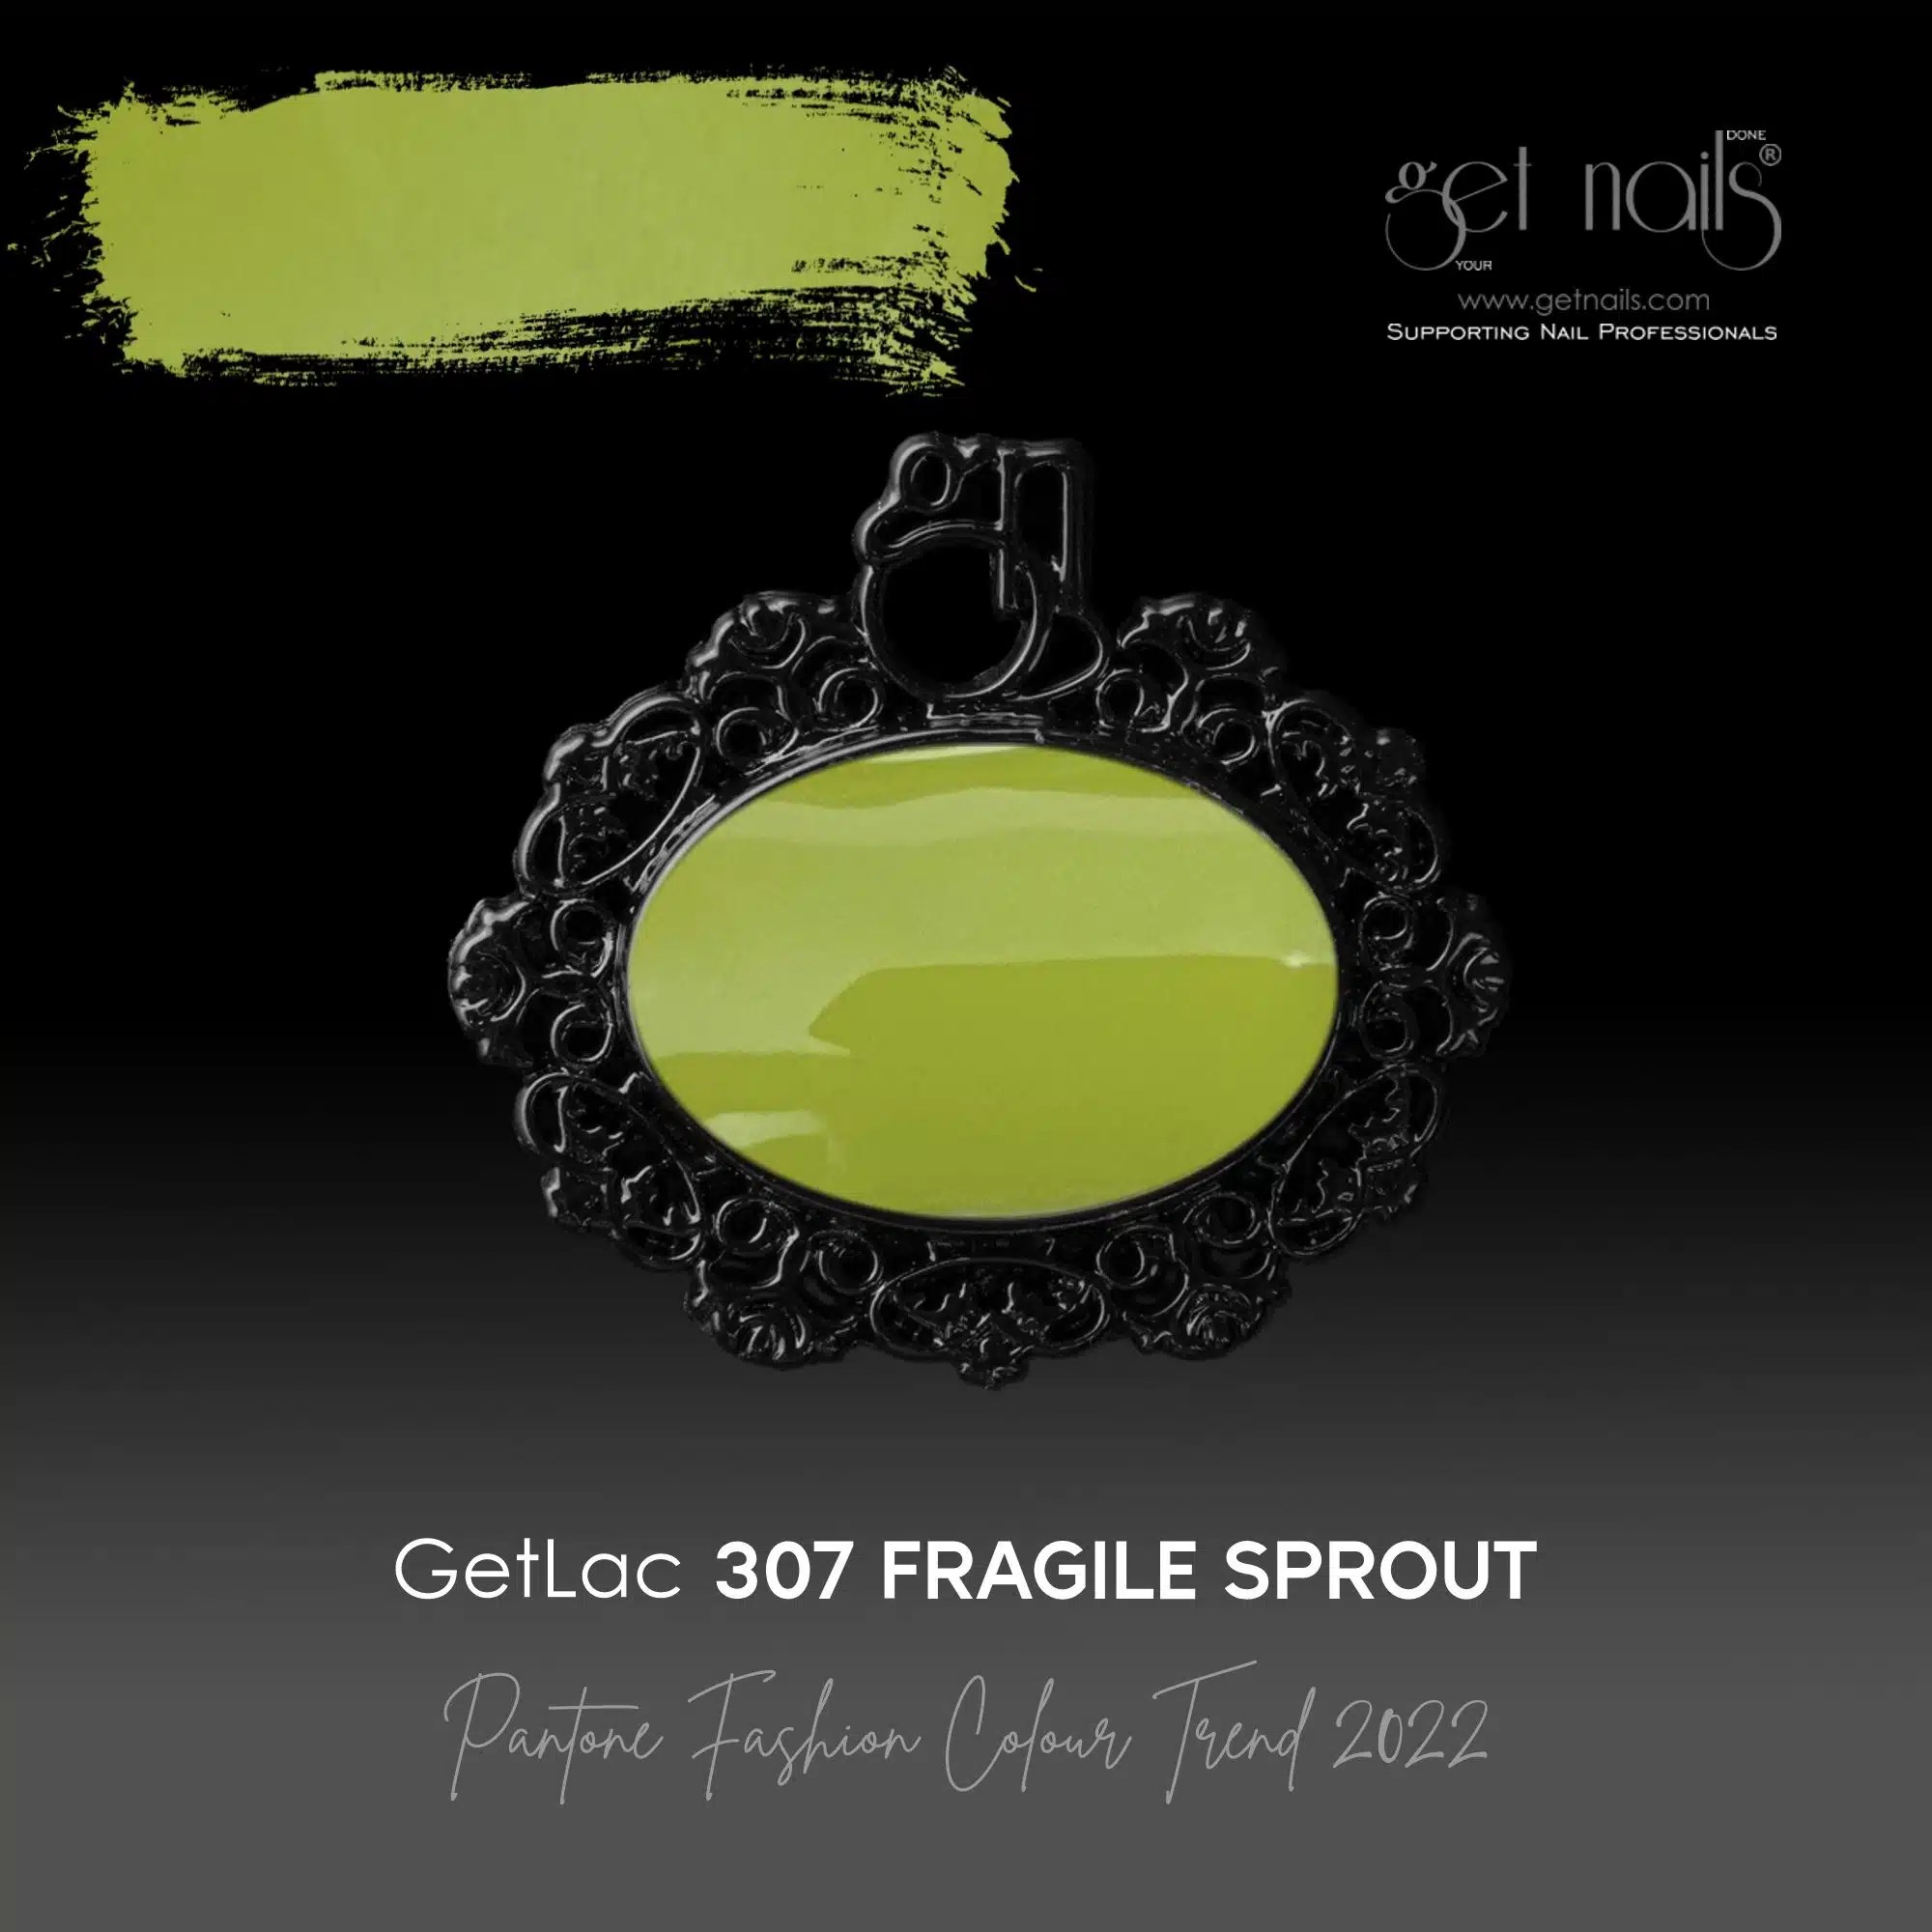 Get Nails Austria - GetLac 307 Fragile Sprout 15 г